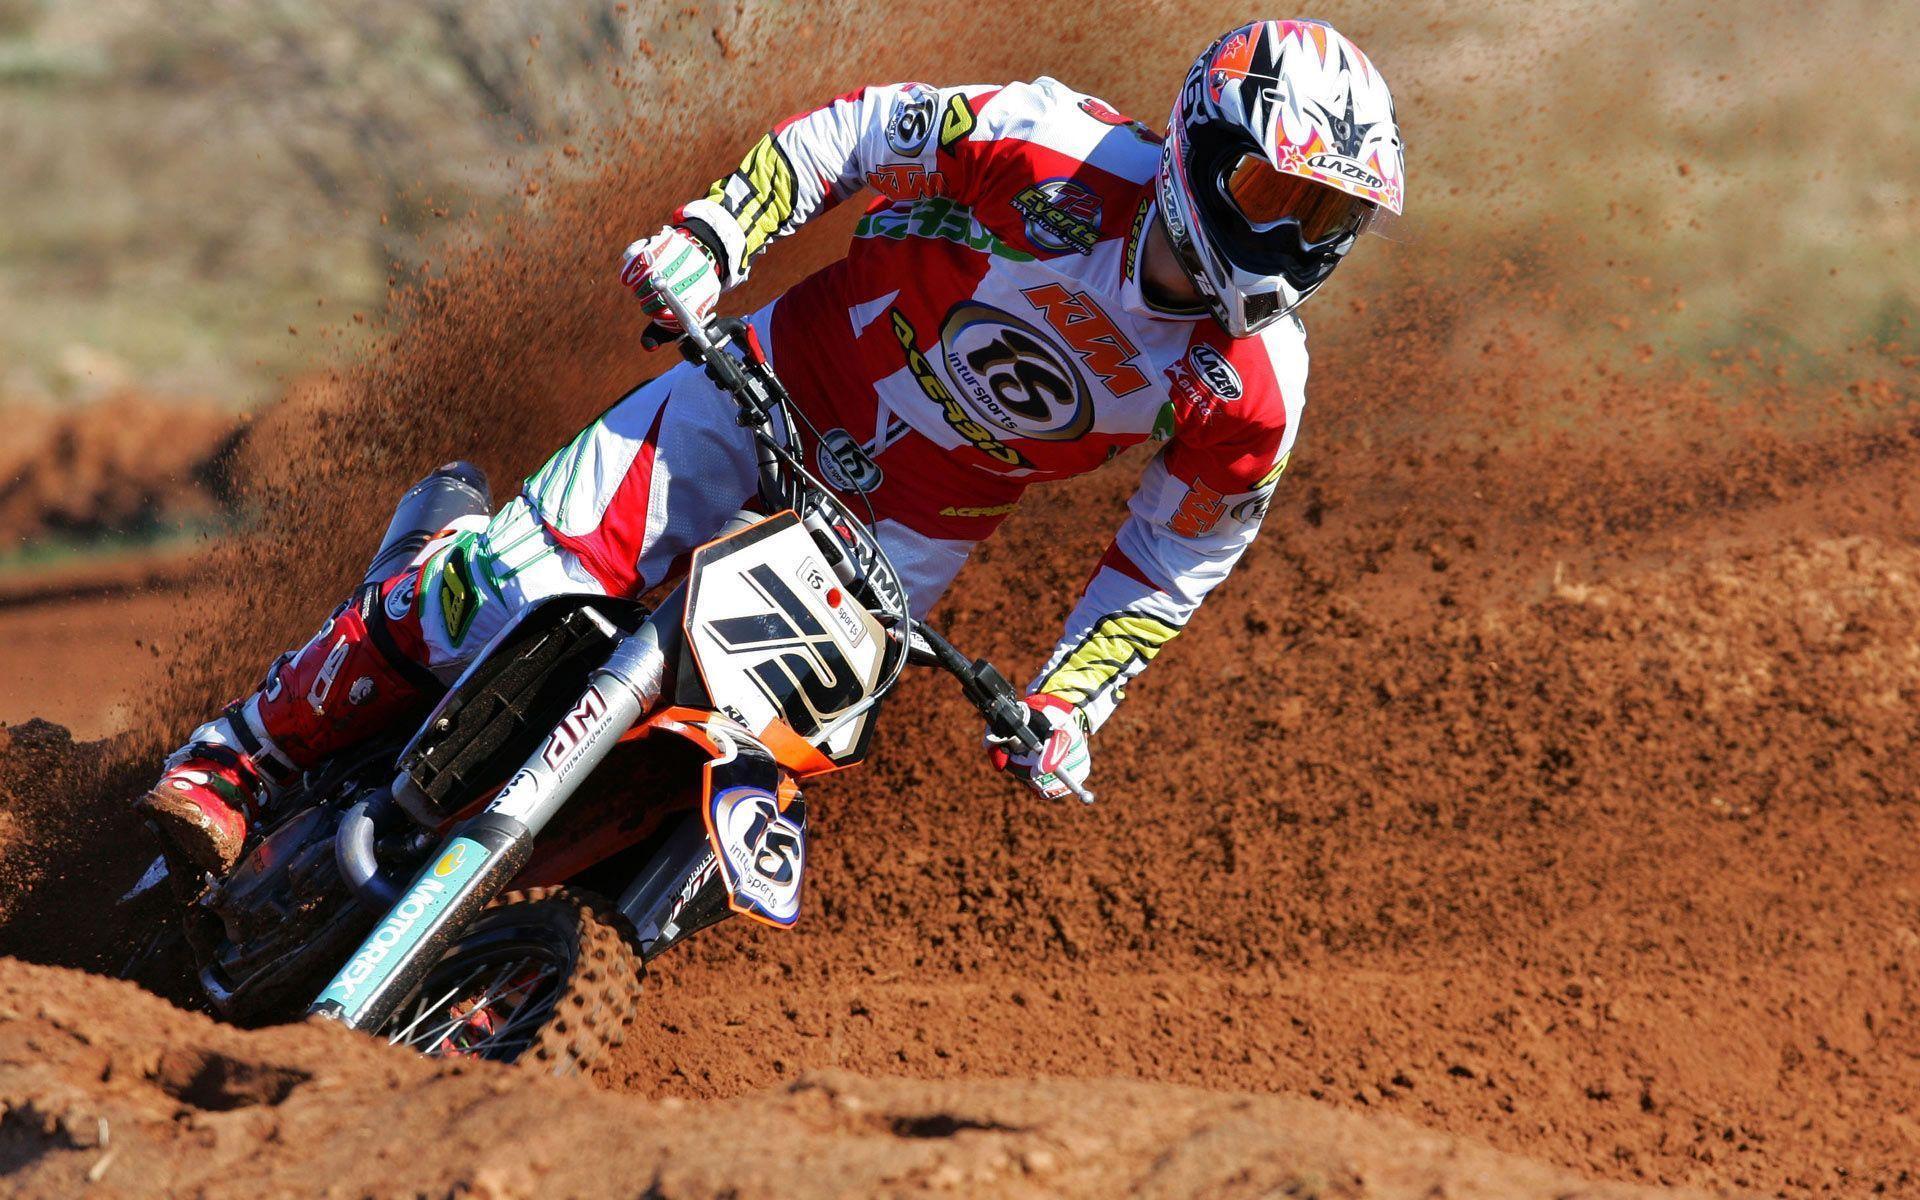 Motocross Background Picture 23122 High Resolution. HD Wallpaper